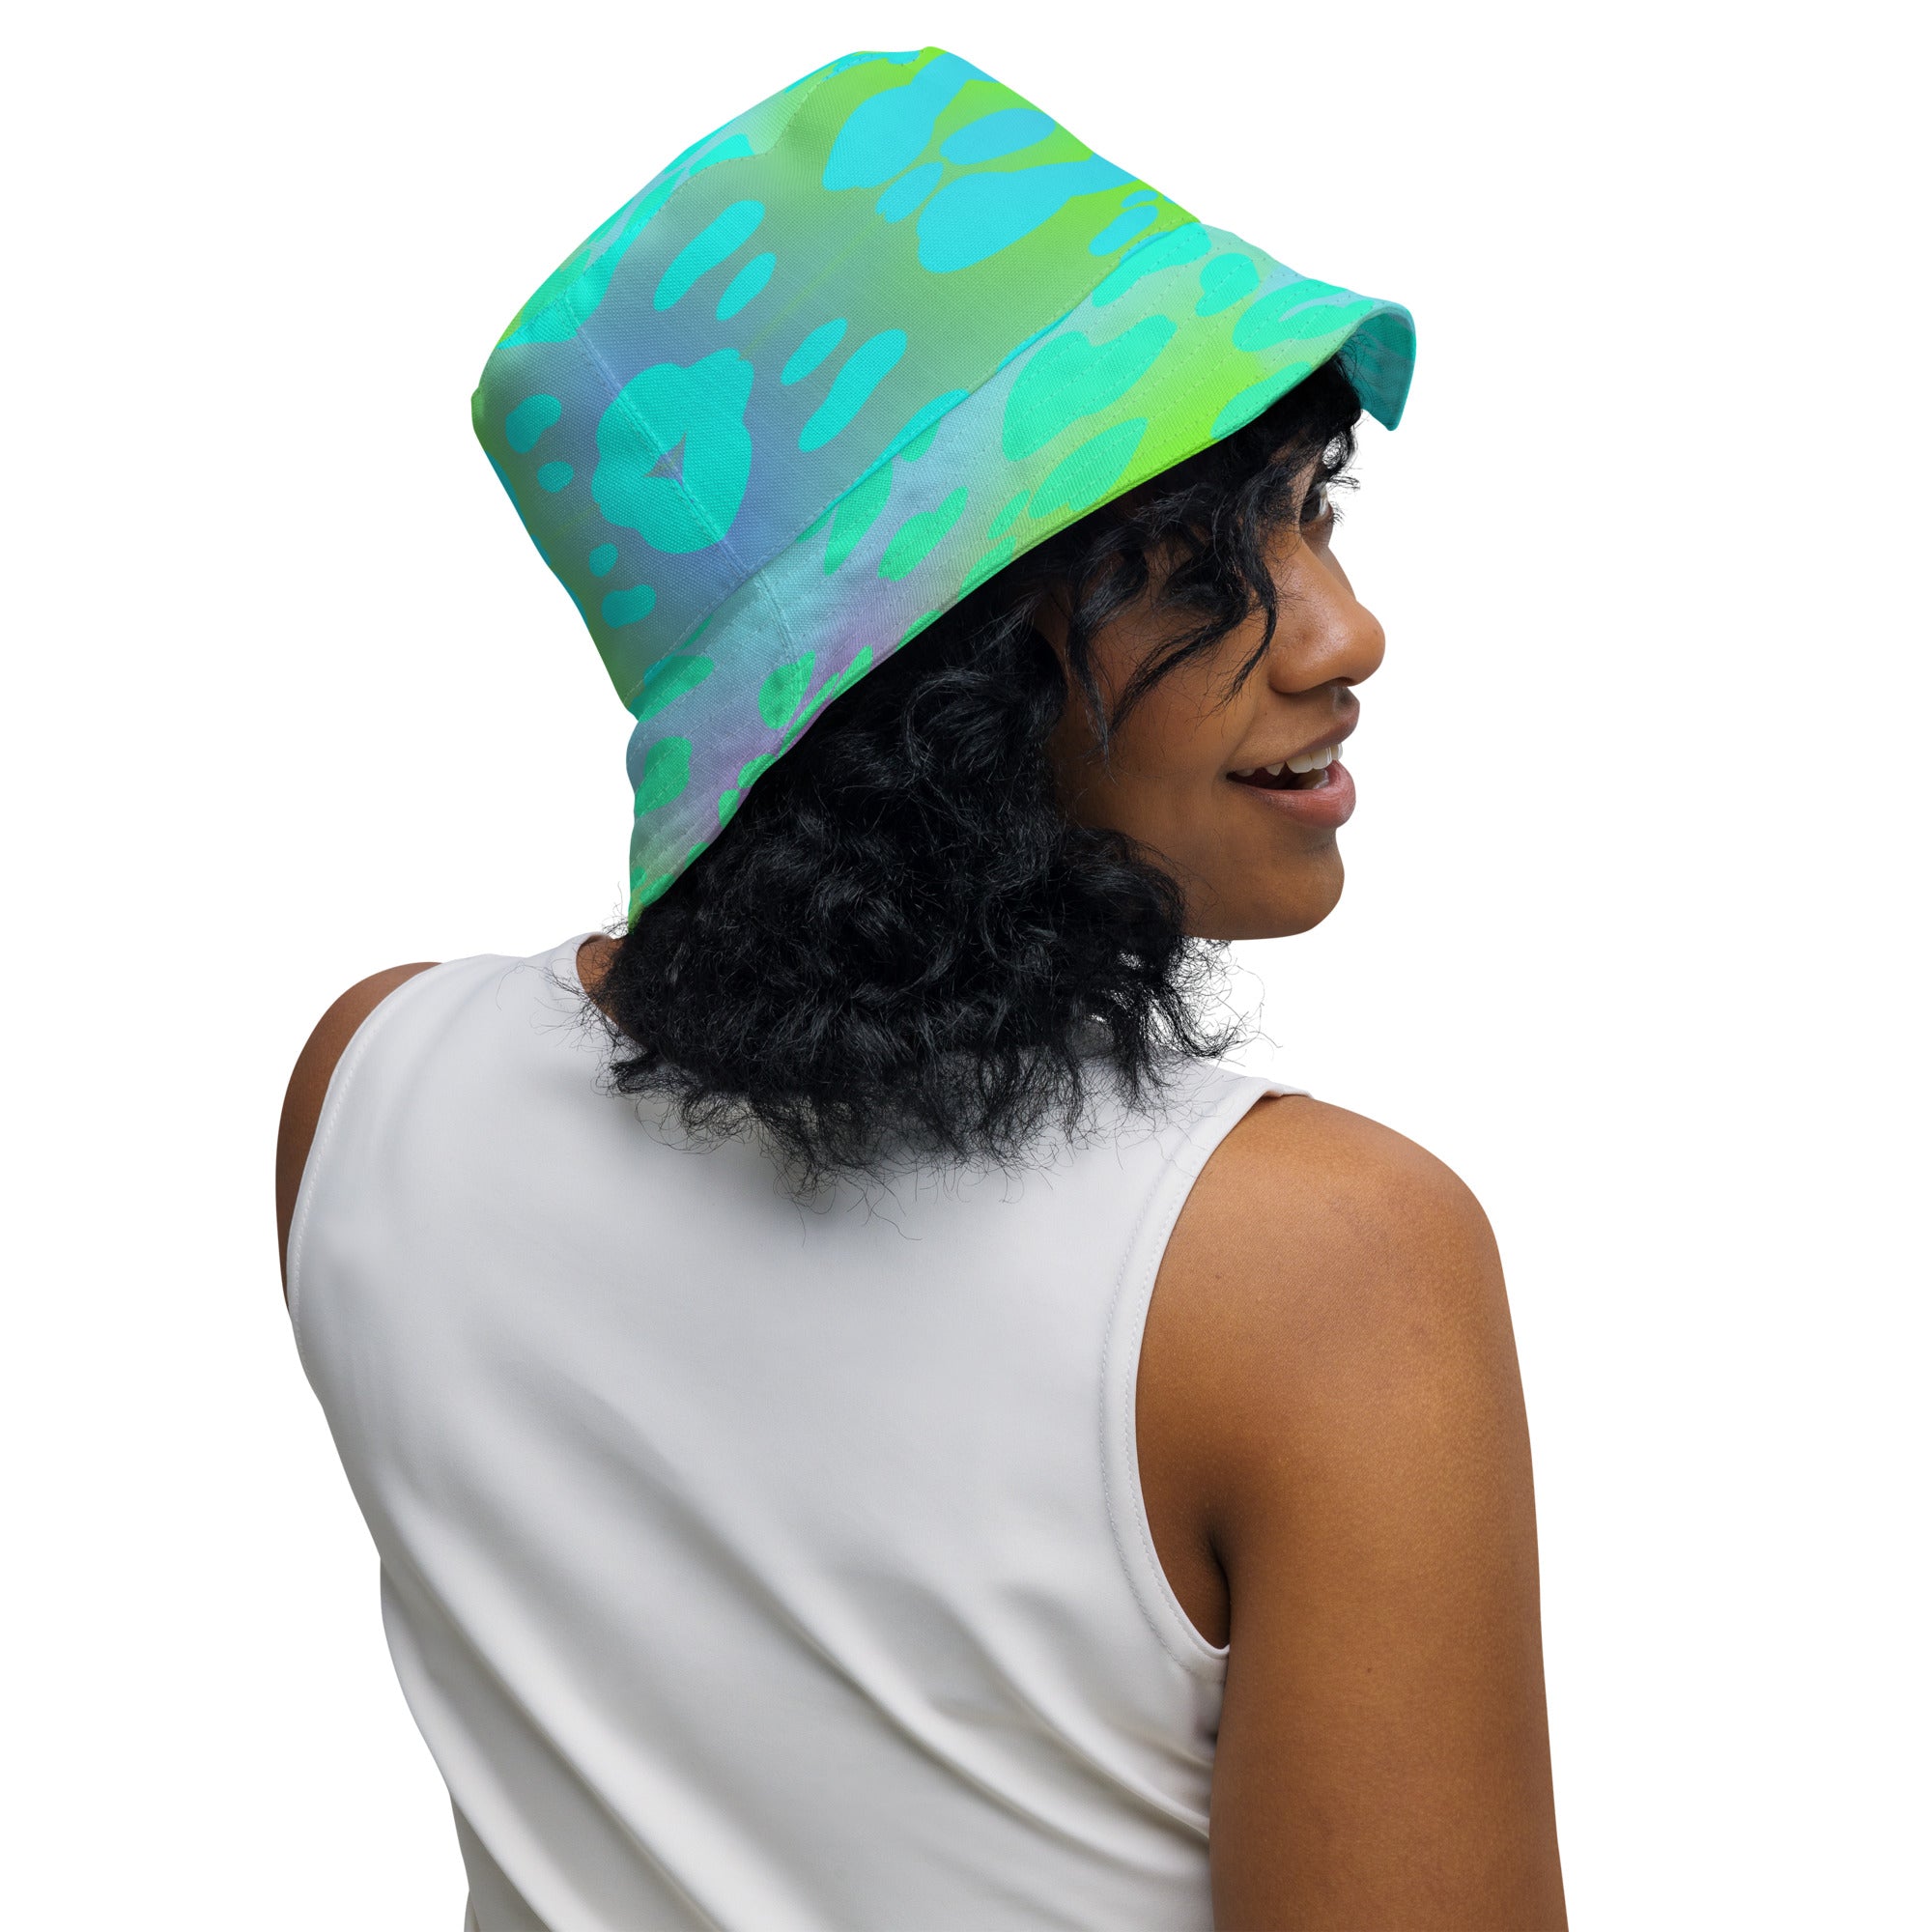 "Neon Jungle: Stand Out with Our Animal Print Bucket Hat", lioness-love